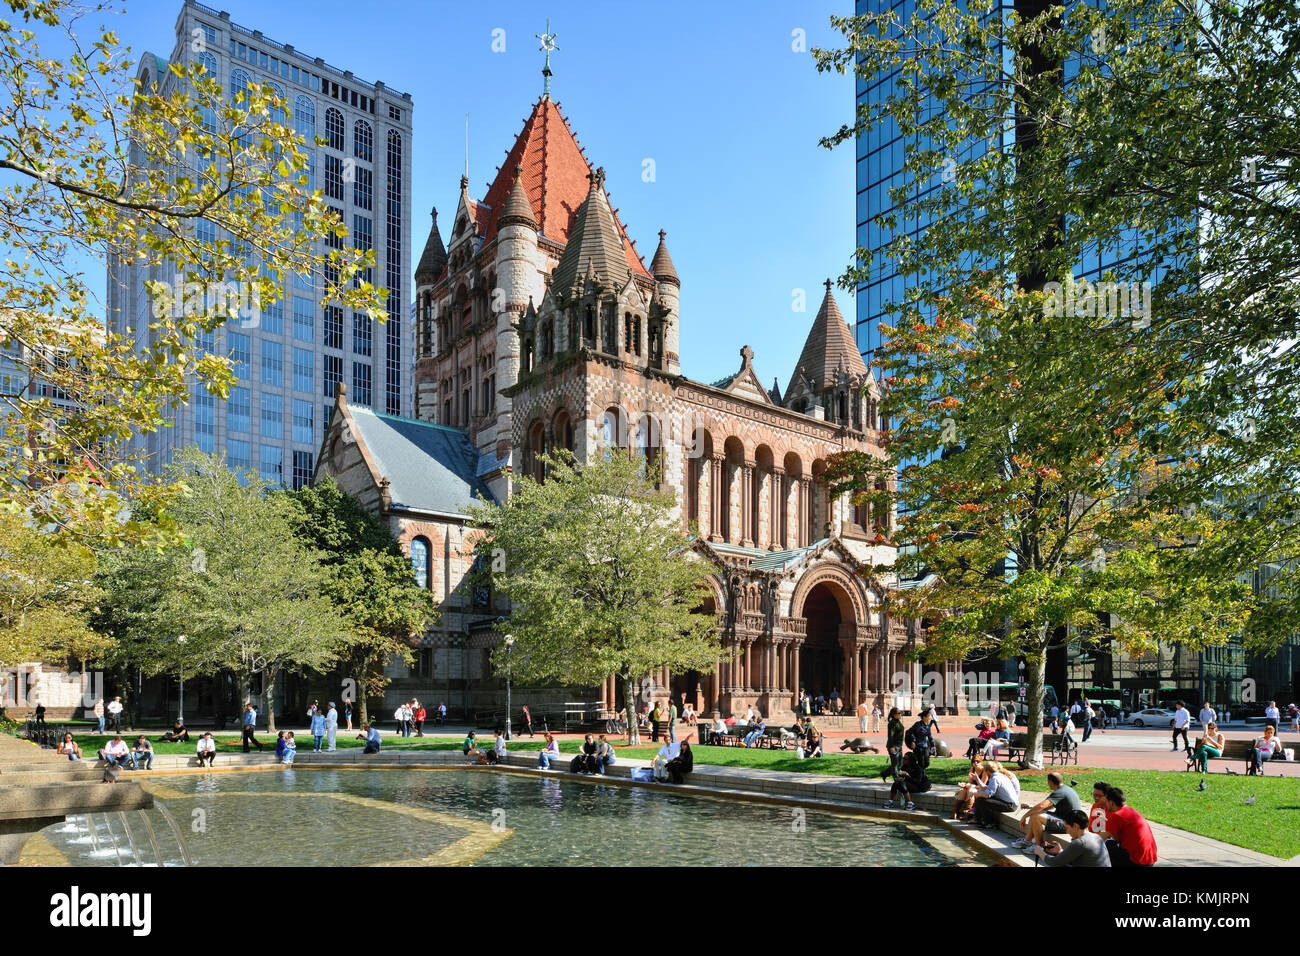 Trinity Church, a national historic landmark building in Back Bay, Boston.  People hanging around the Copley Square fountain in a sunny day of fall. Stock Photo